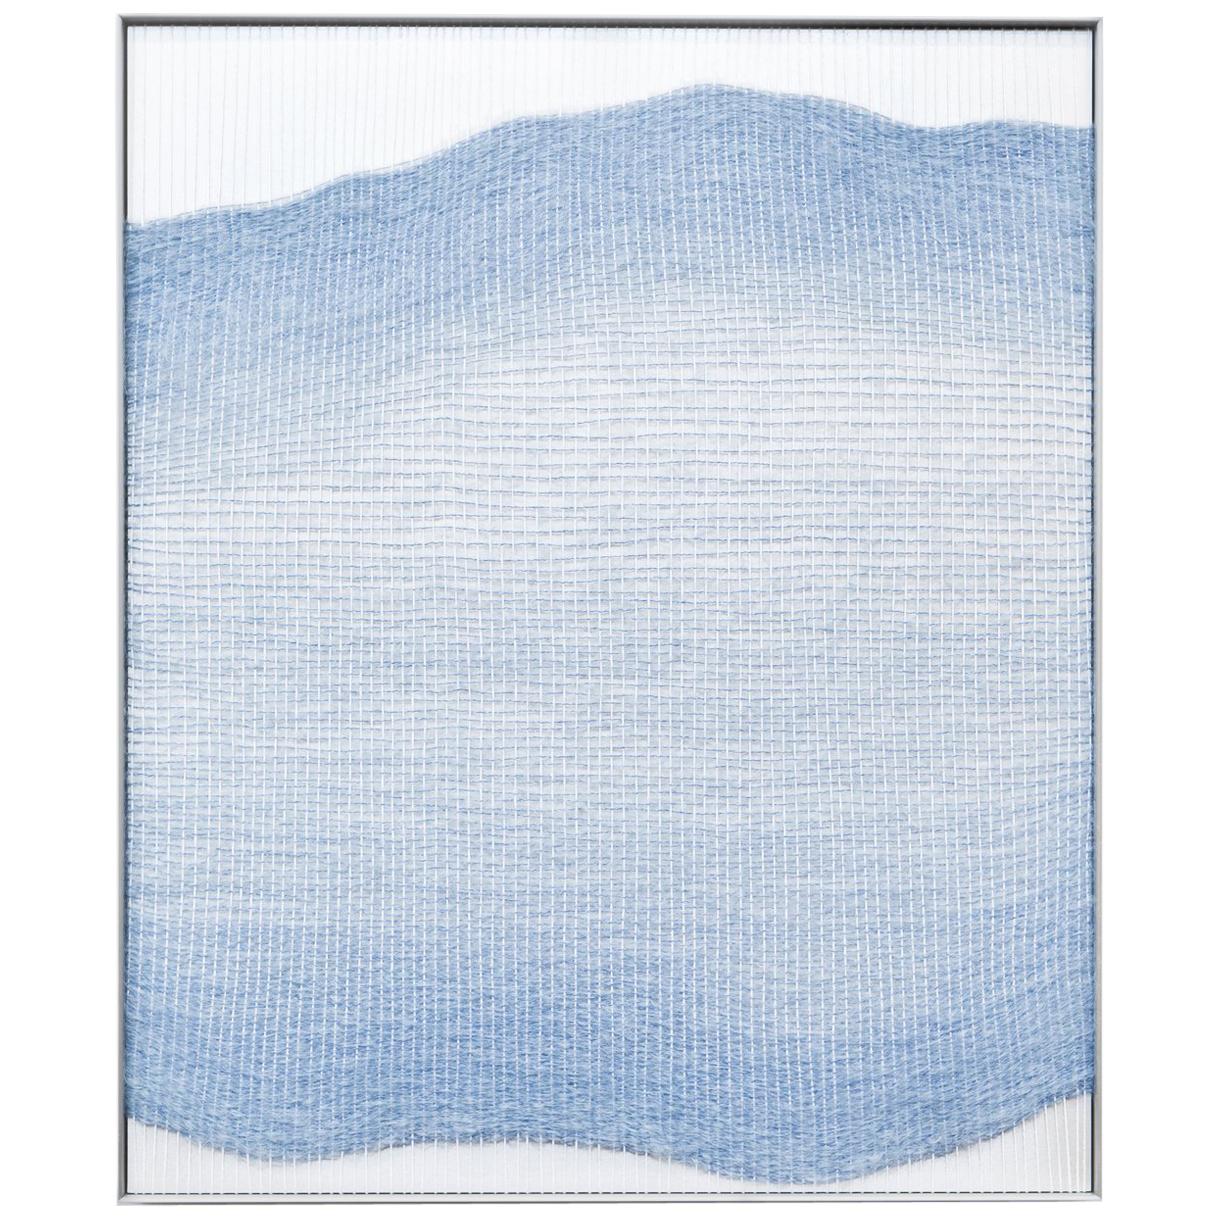 Contemporary Handwoven Wall Fiber Art, Pale Blue Live Edge Form by Mimi Jung For Sale